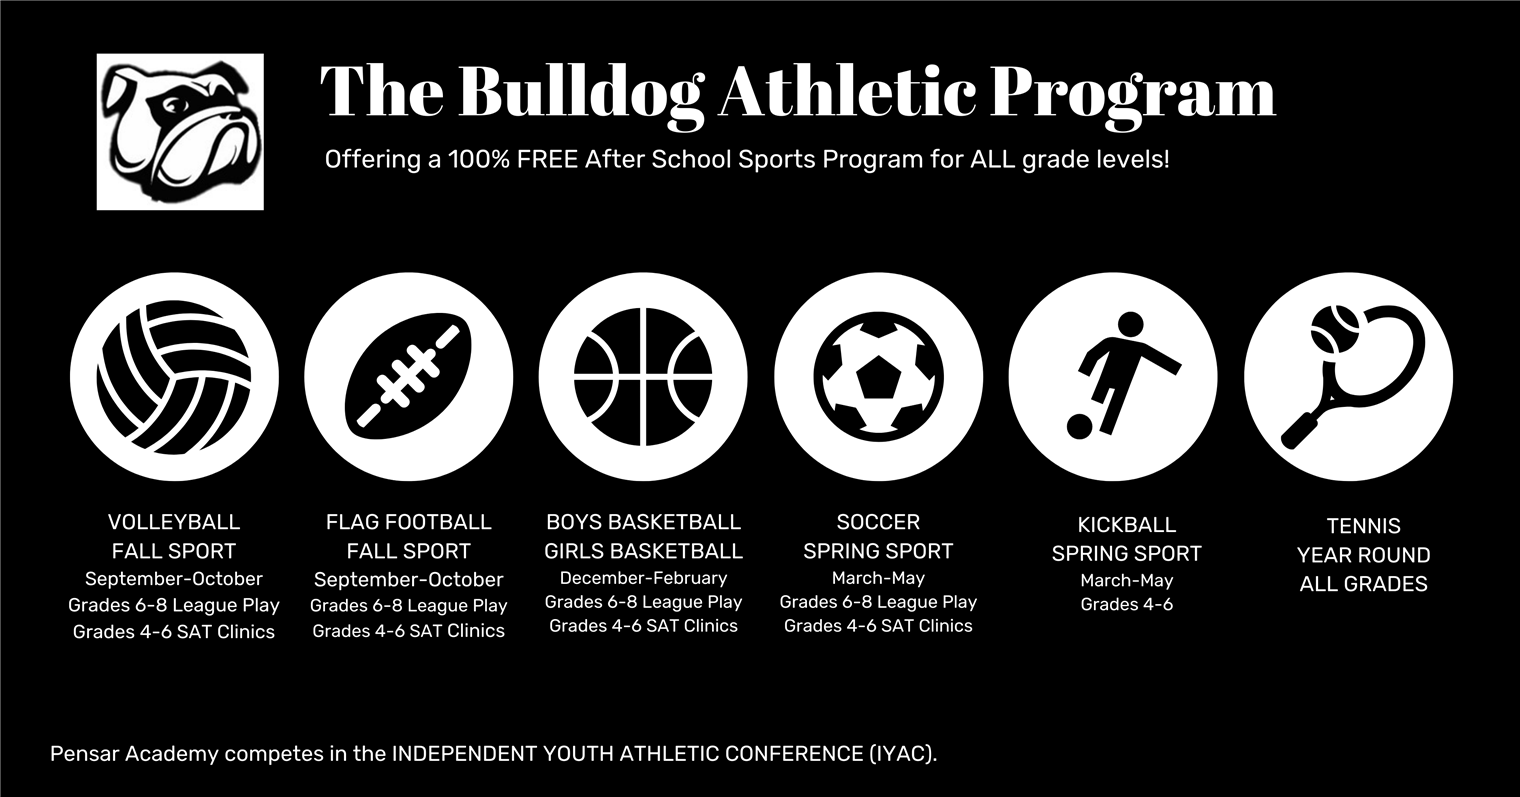 Bulldog Athletics offers volleyball, basketball, flag football, tennis, and kickball free of charge to all students.